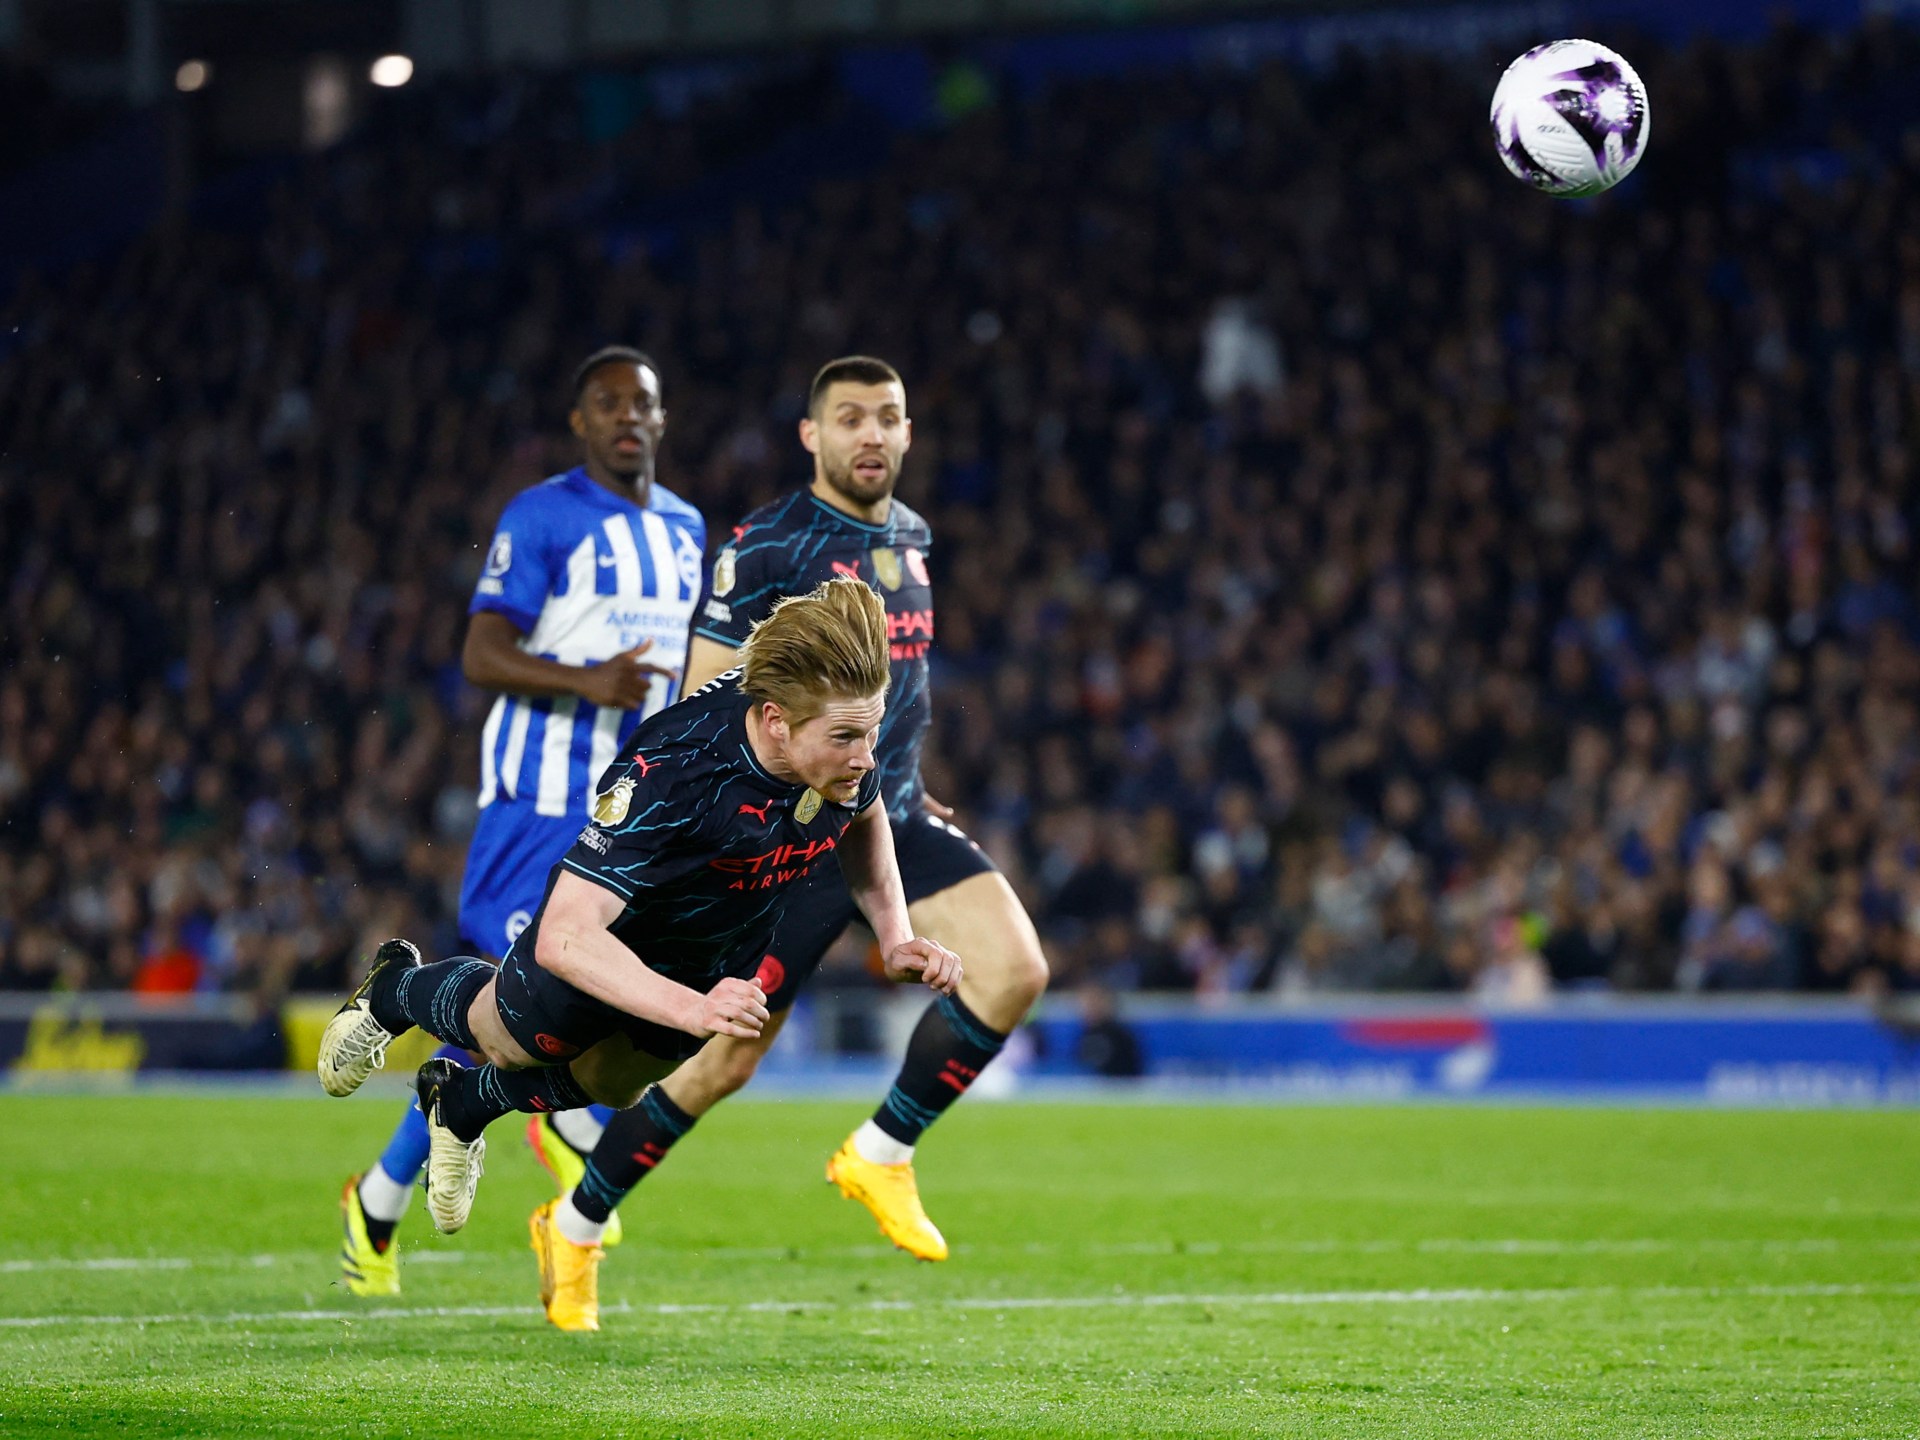 man-city-close-gap-on-arsenal-to-one-point-with-emphatic-win-at-brighton